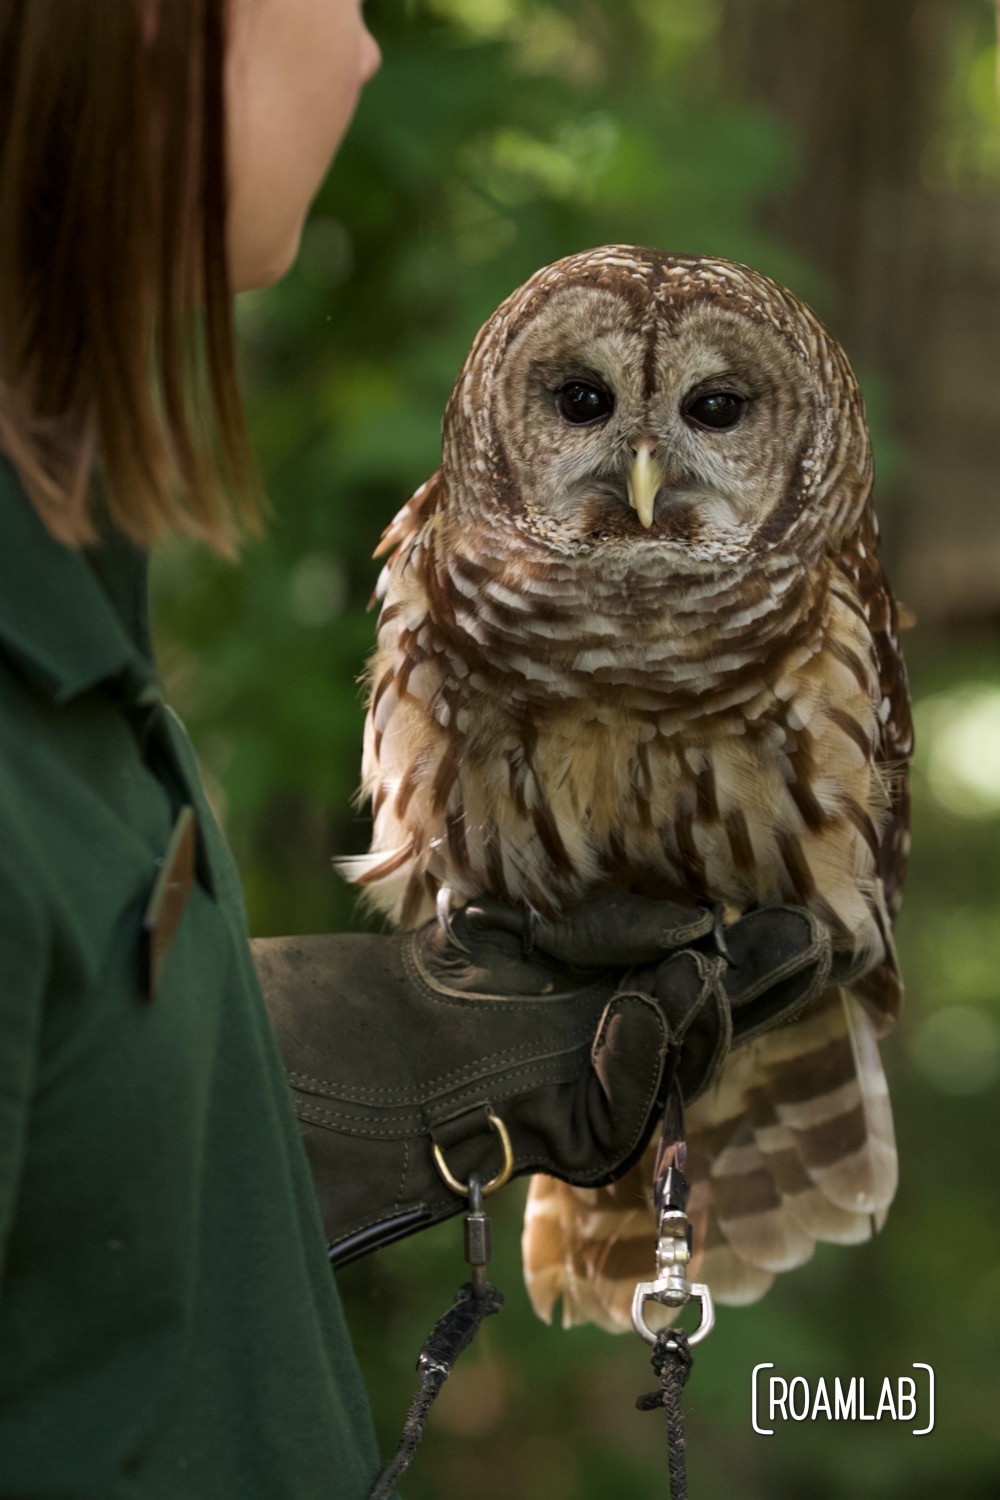 Woodlands Nature Station staff member balances Midnight the barred owl on her gloved wrist.